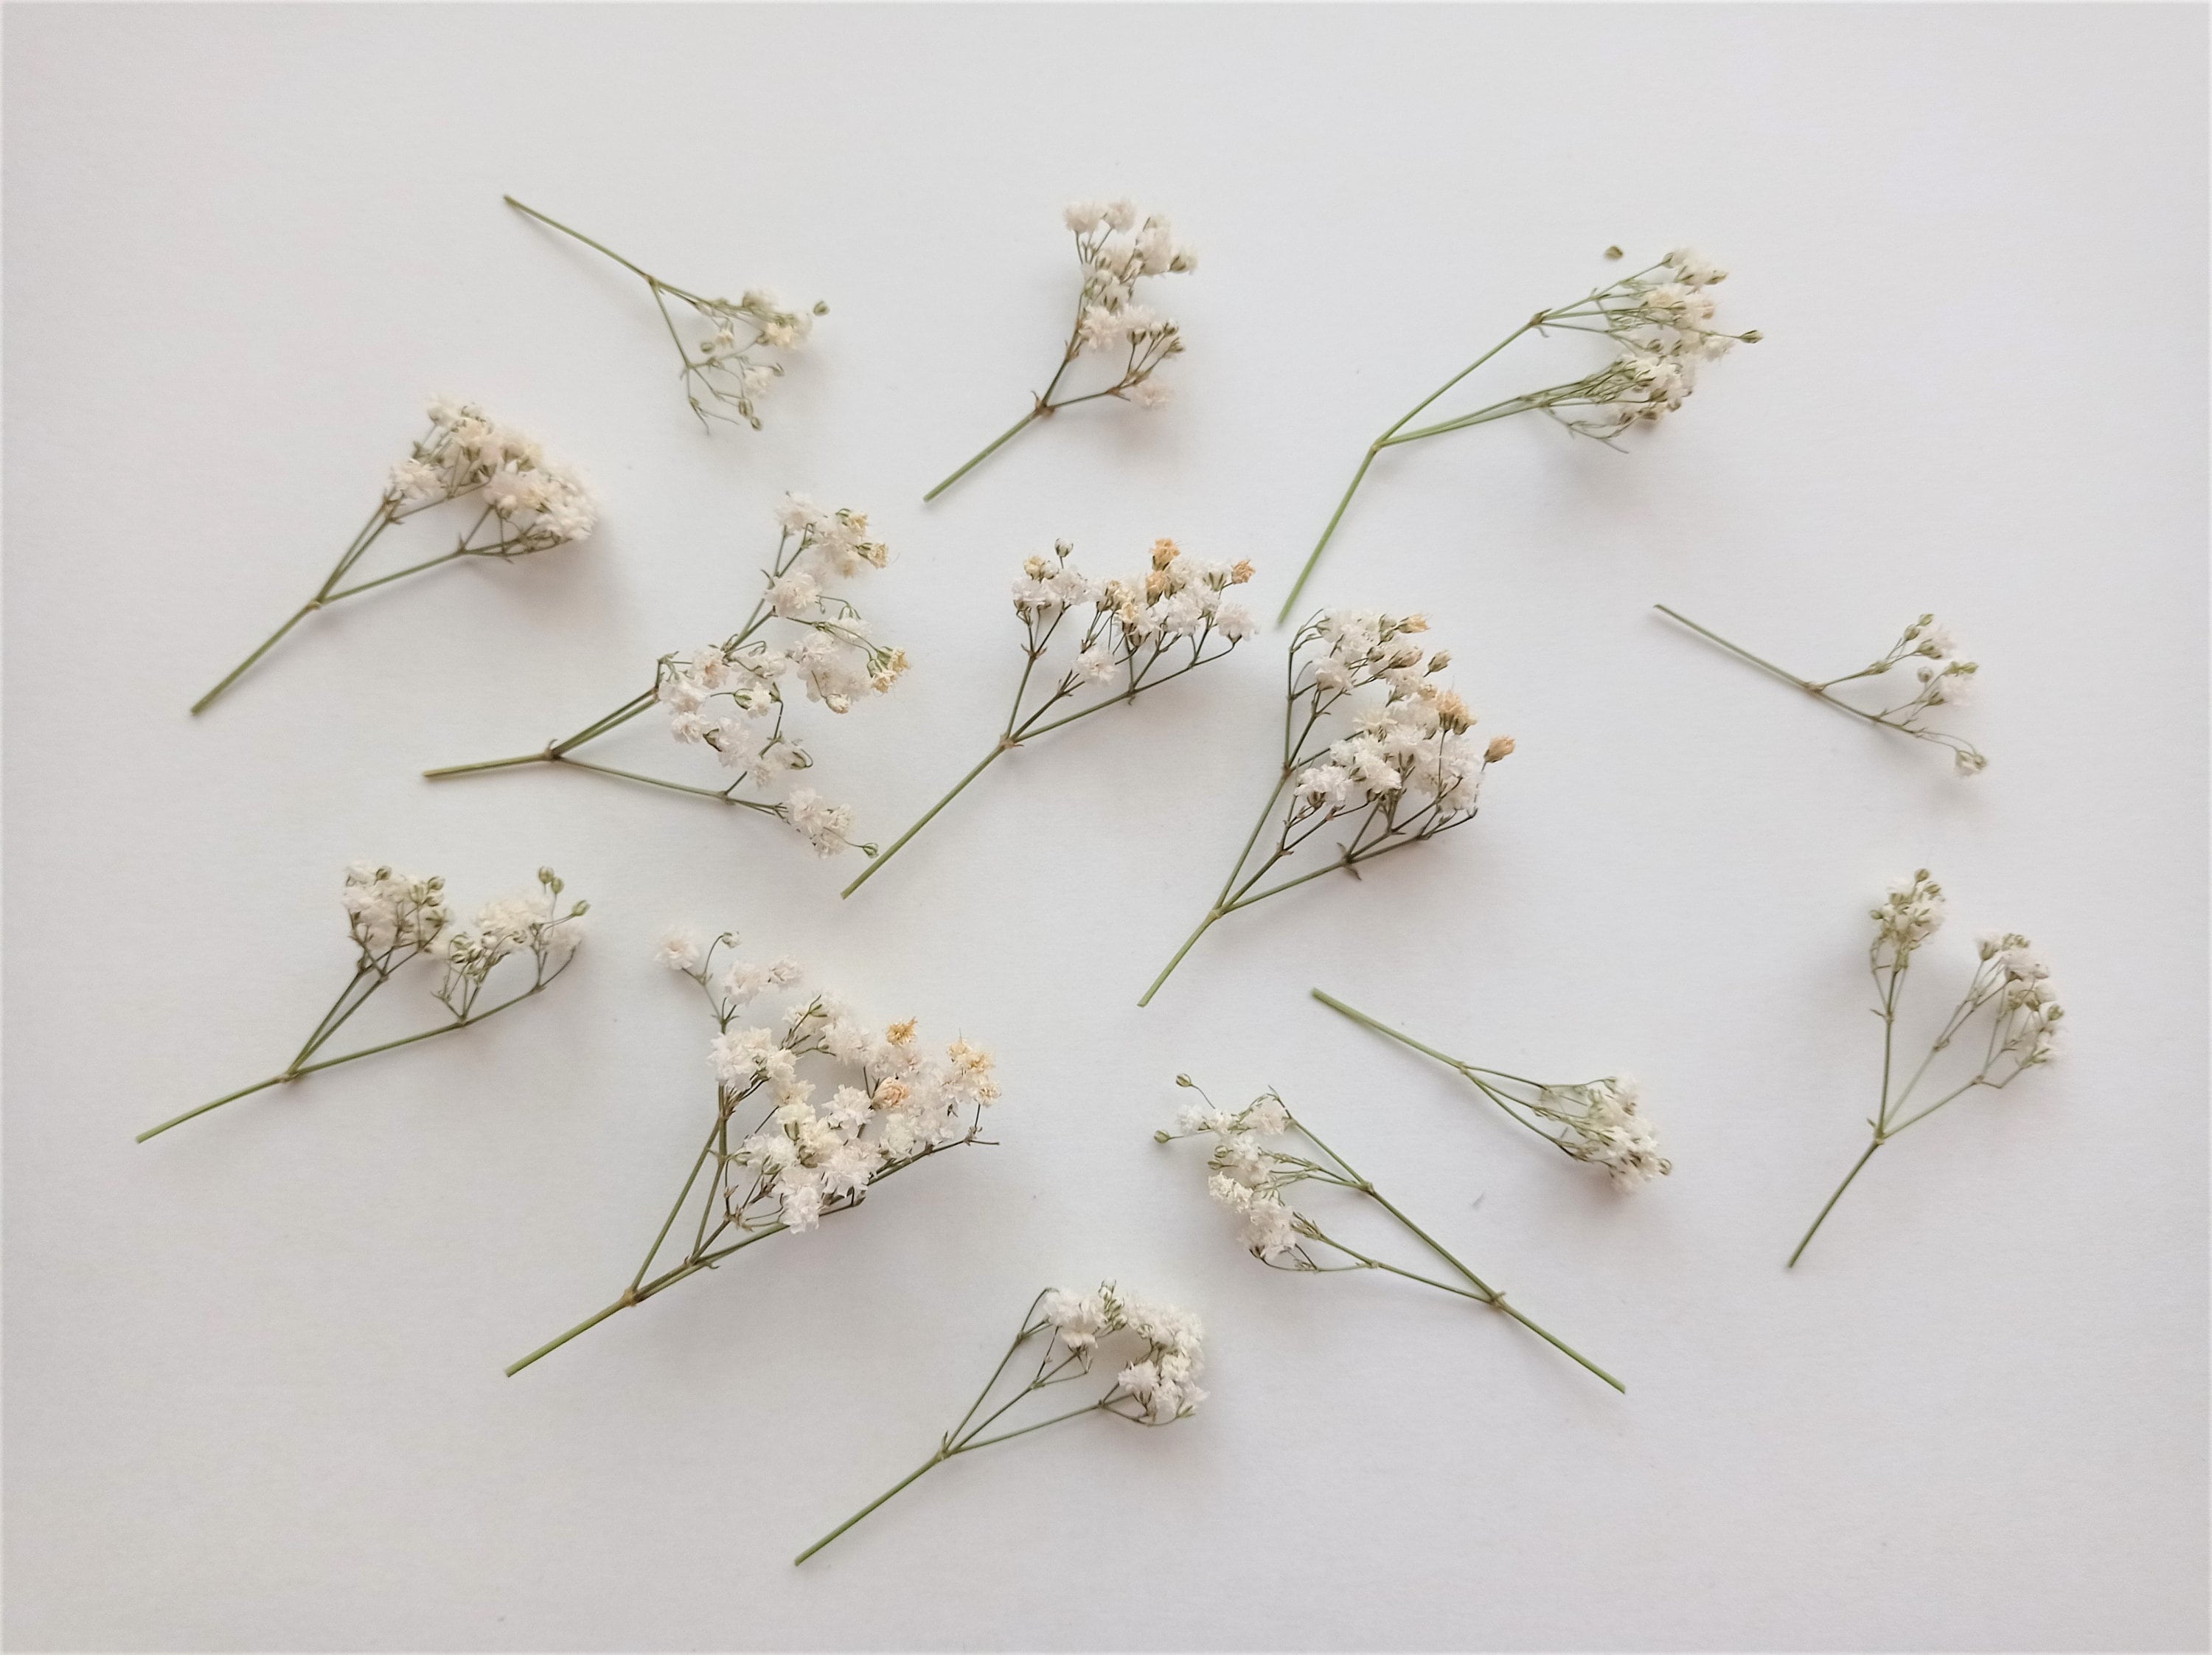 10pcs Artificial Fake Flowers Babys Breath Real Touch Gypsophila Floral in Bulk for Home Wedding Garden Decor (White Long Stem), Size: 22